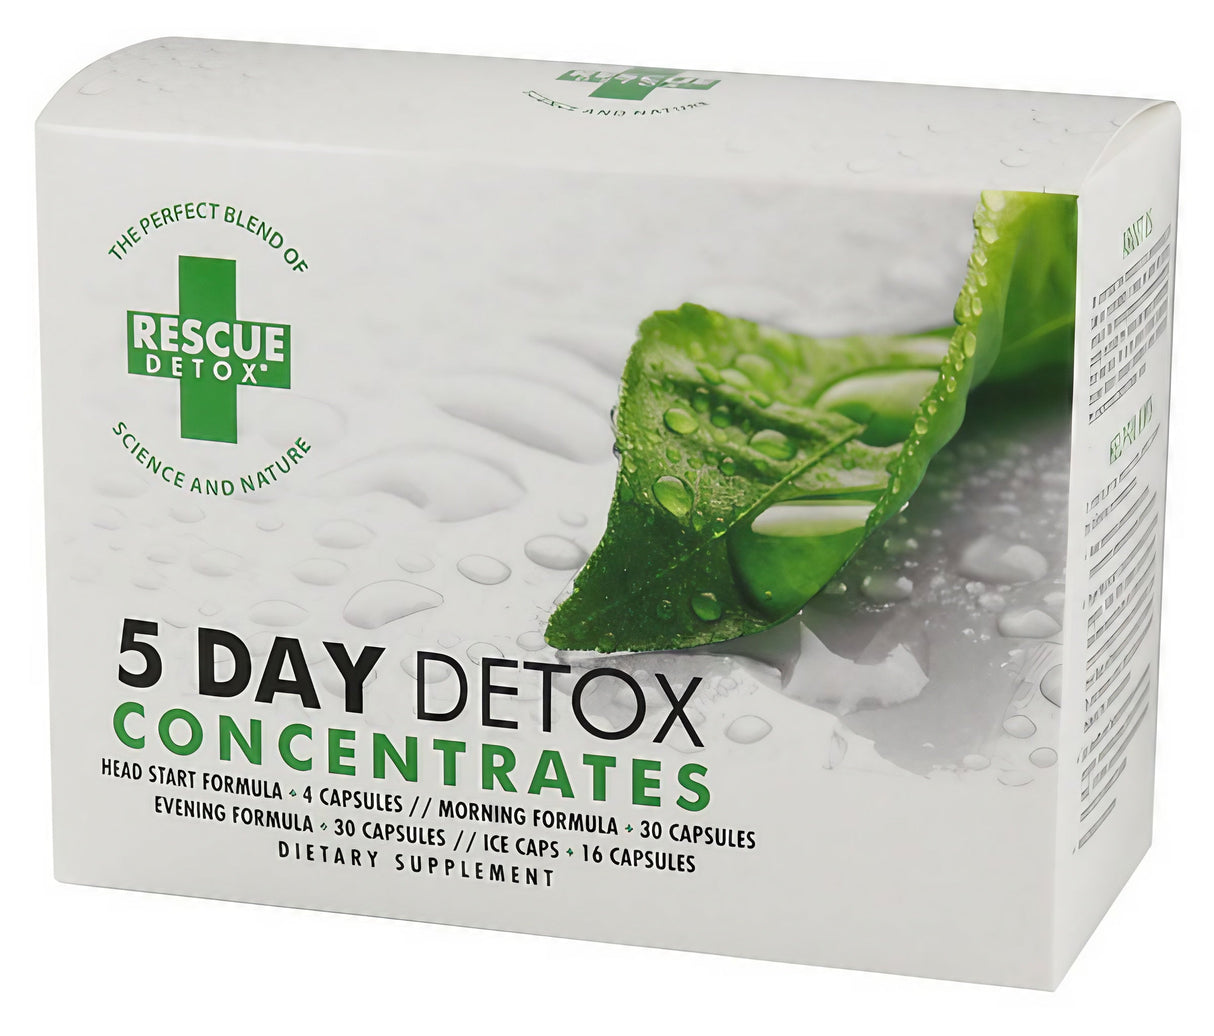 Rescue Detox 5 Day Detox Kit front view with green and white packaging